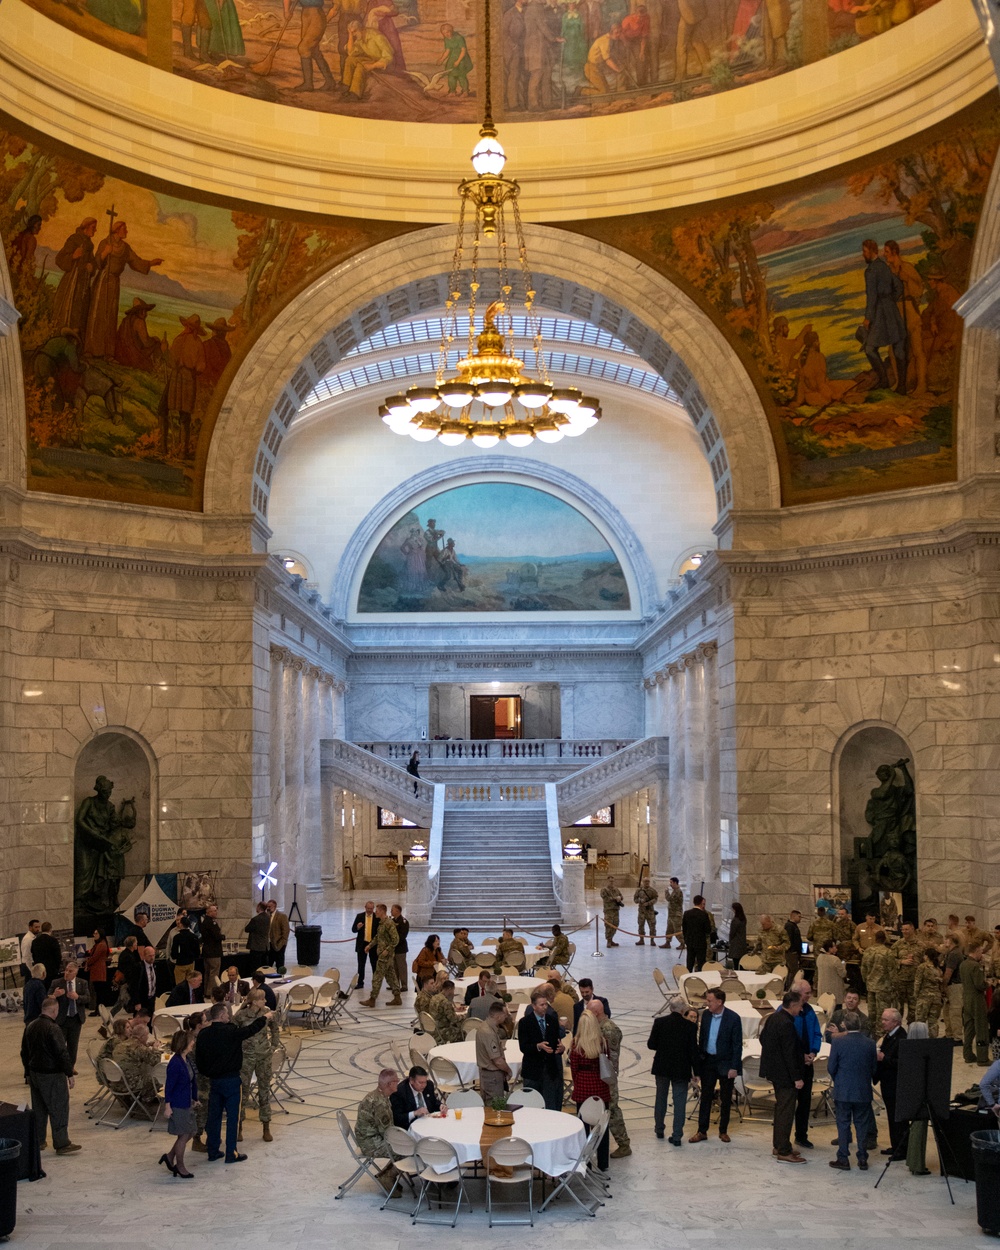 419th Fighter Wing engages with state legislators at the Utah State Capitol